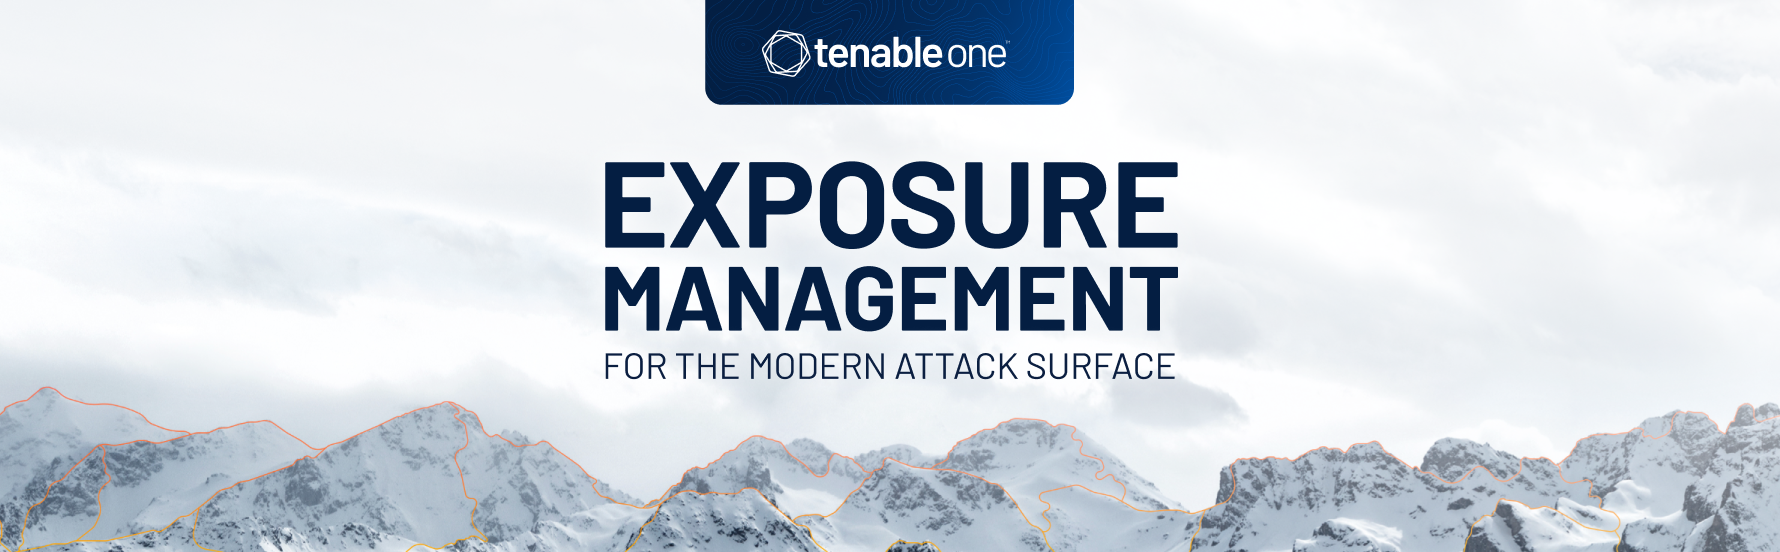 How Tenable used Snowflake to build its exposure management platform